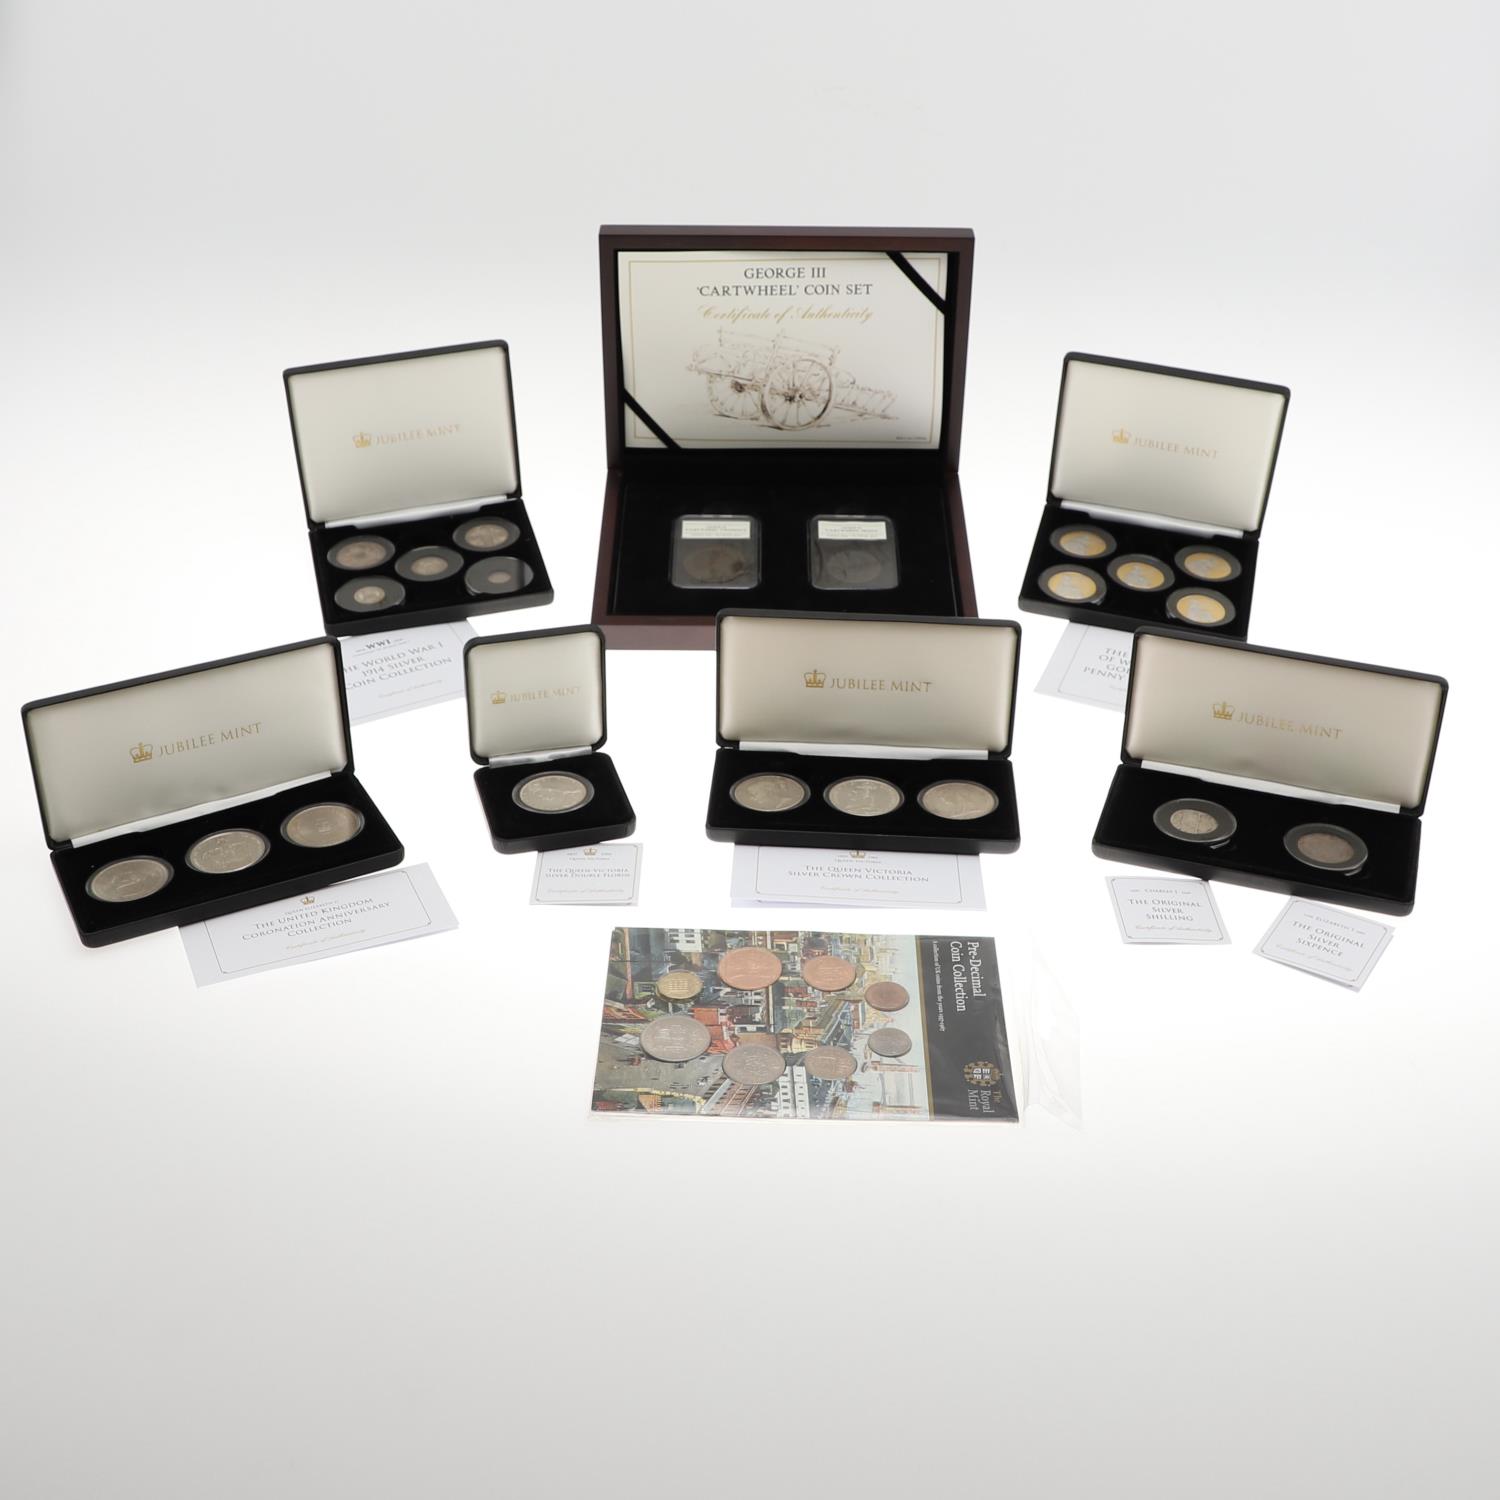 A COLLECTION OF JUBILEE MINT AND OTHER SETS OF PRE-DECIMAL COINS IN PRESENTATION CASES.